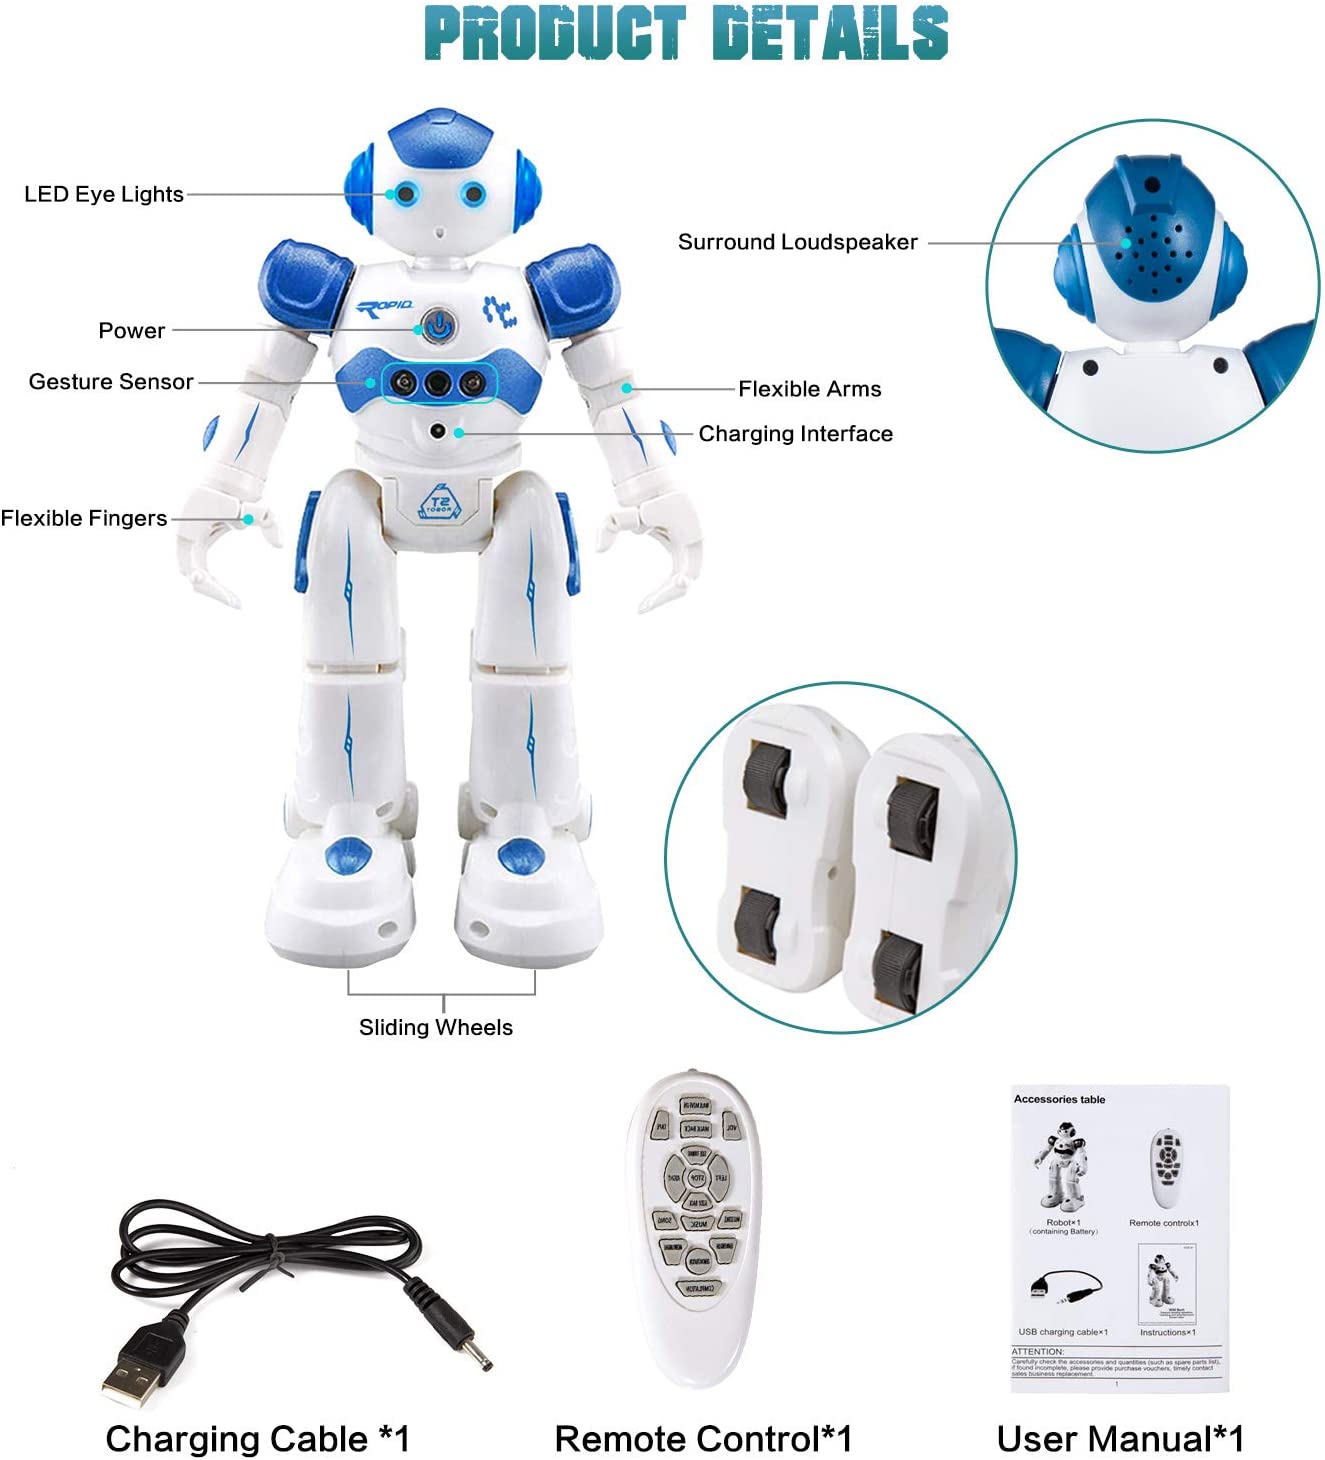 Remote Control Robot Toys for Kids.